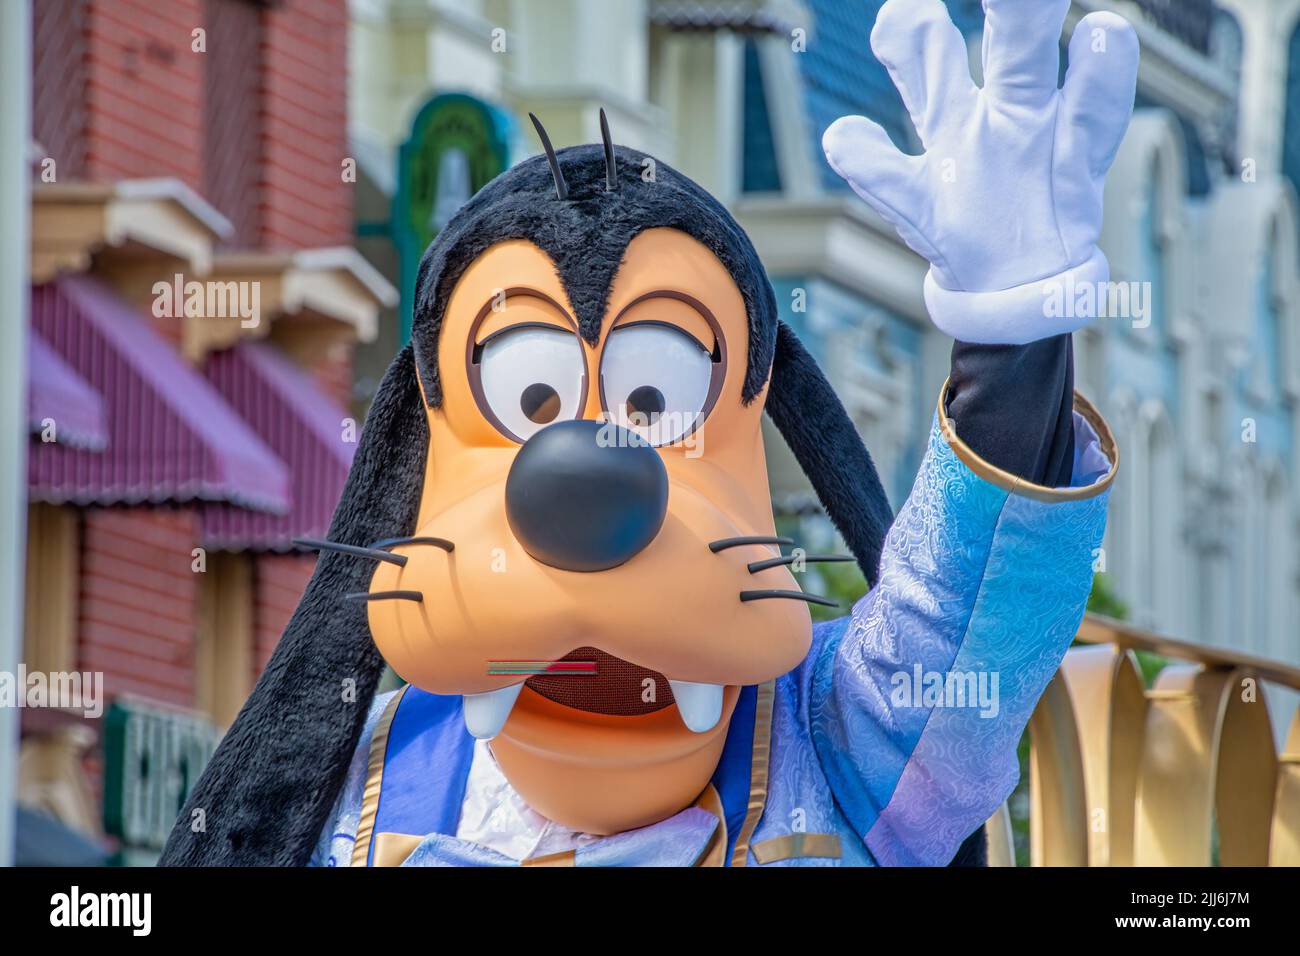 Goofy character at DIsney Magic Kingdom in 50th celebration outfit Stock Photo